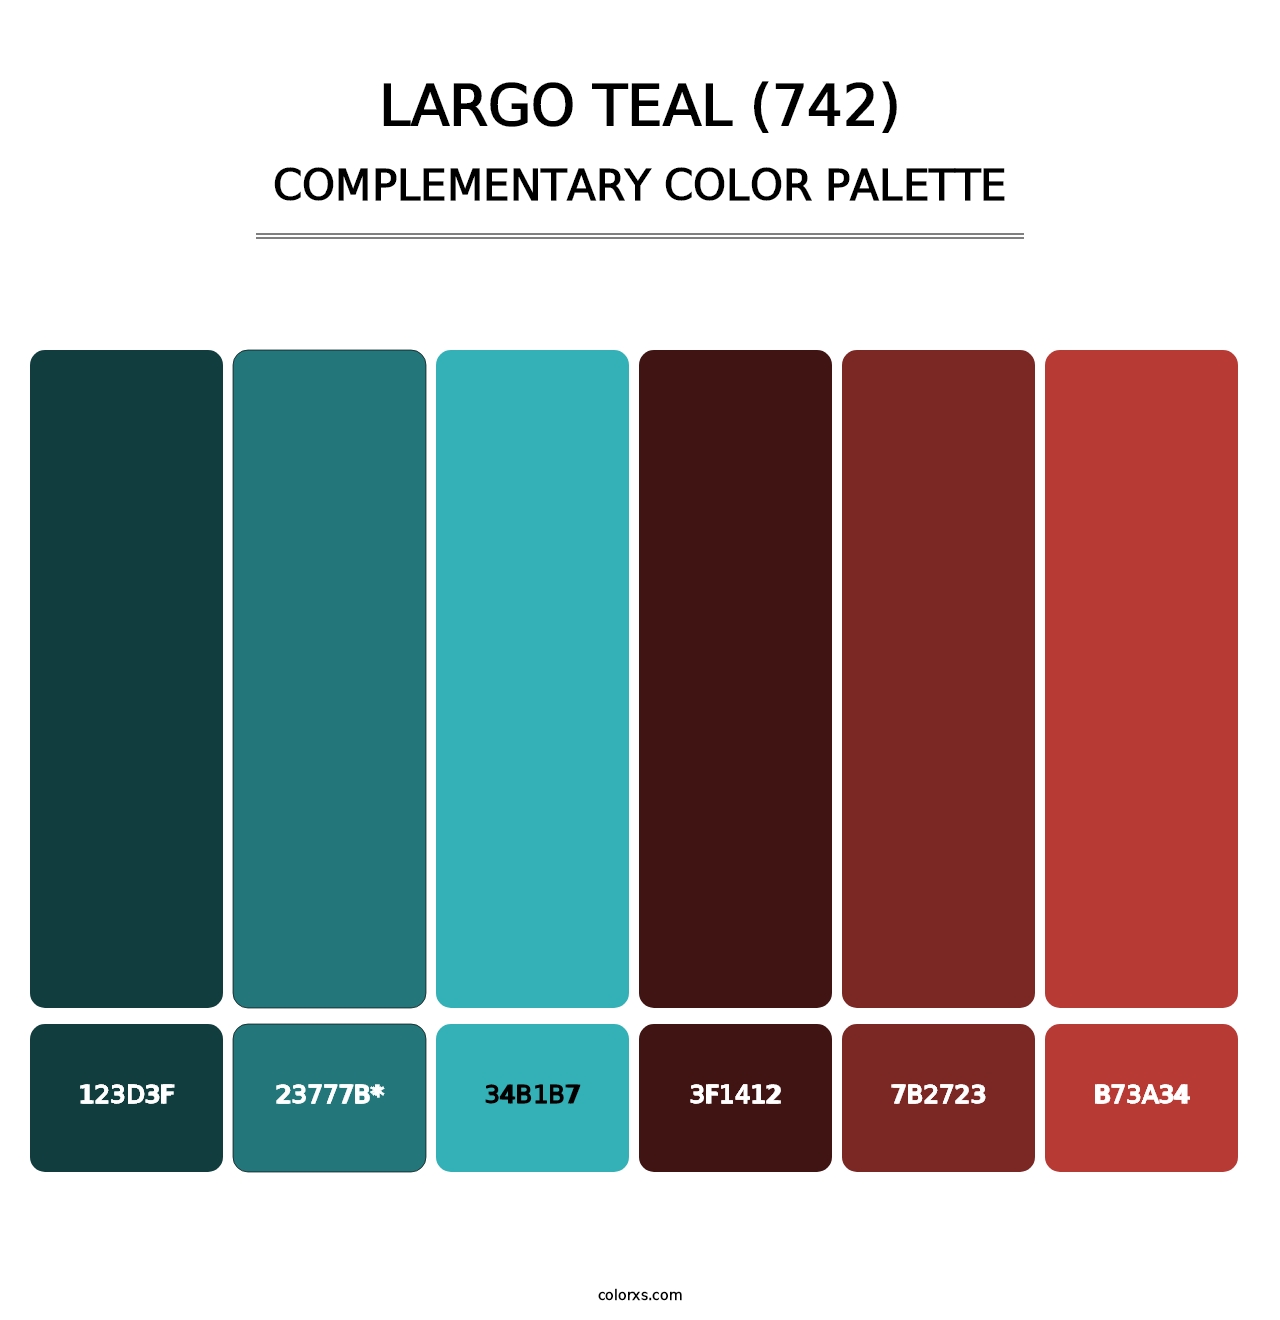 Largo Teal (742) - Complementary Color Palette